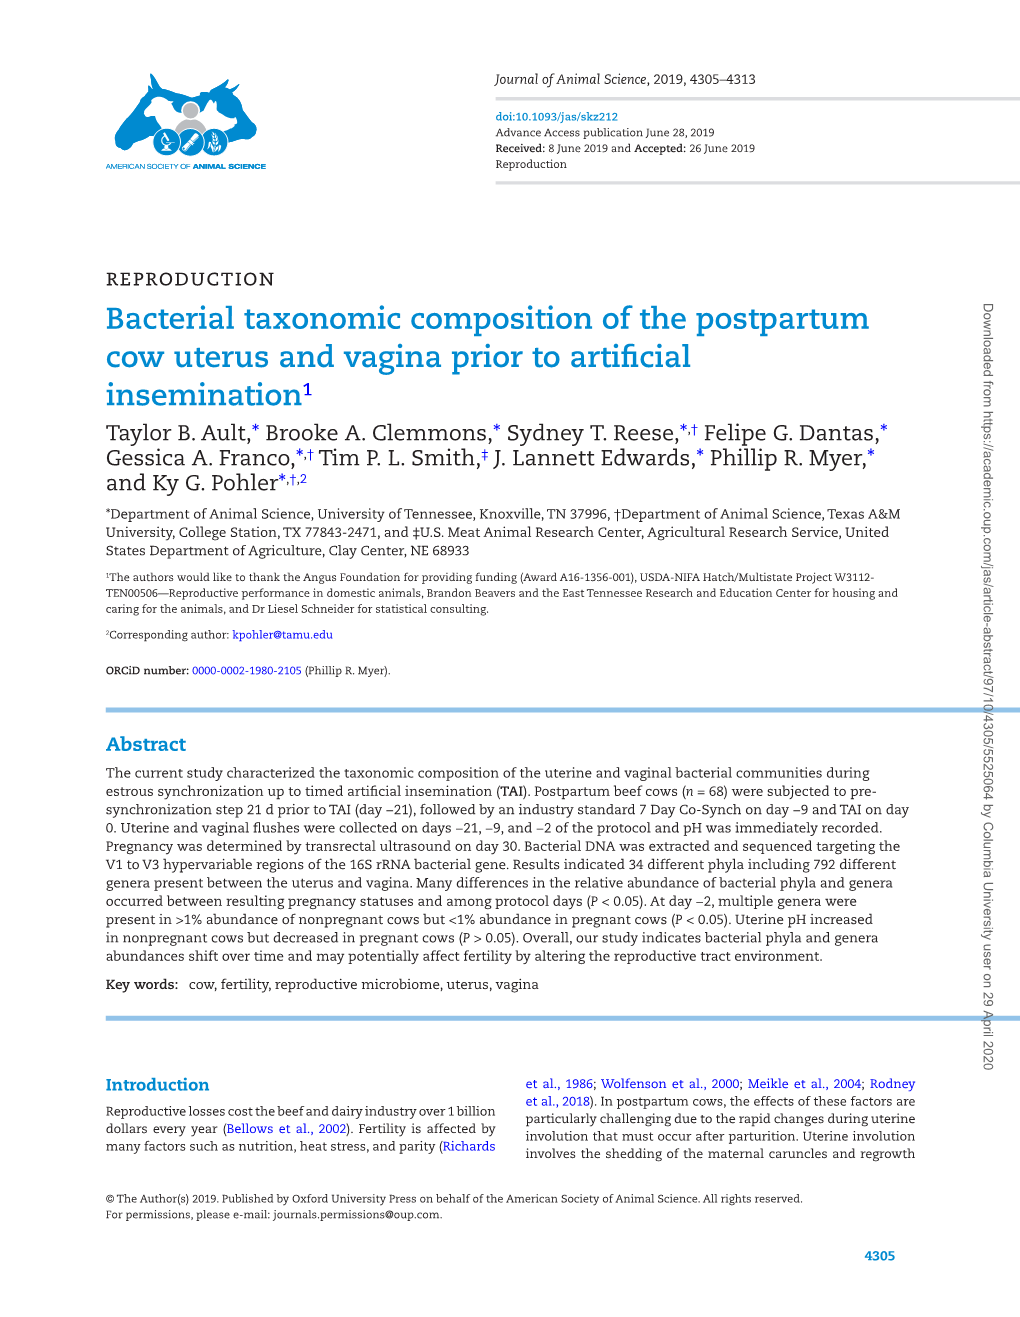 Bacterial Taxonomic Composition of the Postpartum Cow Uterus and Vagina Prior to Artificial Insemination1 Taylor B